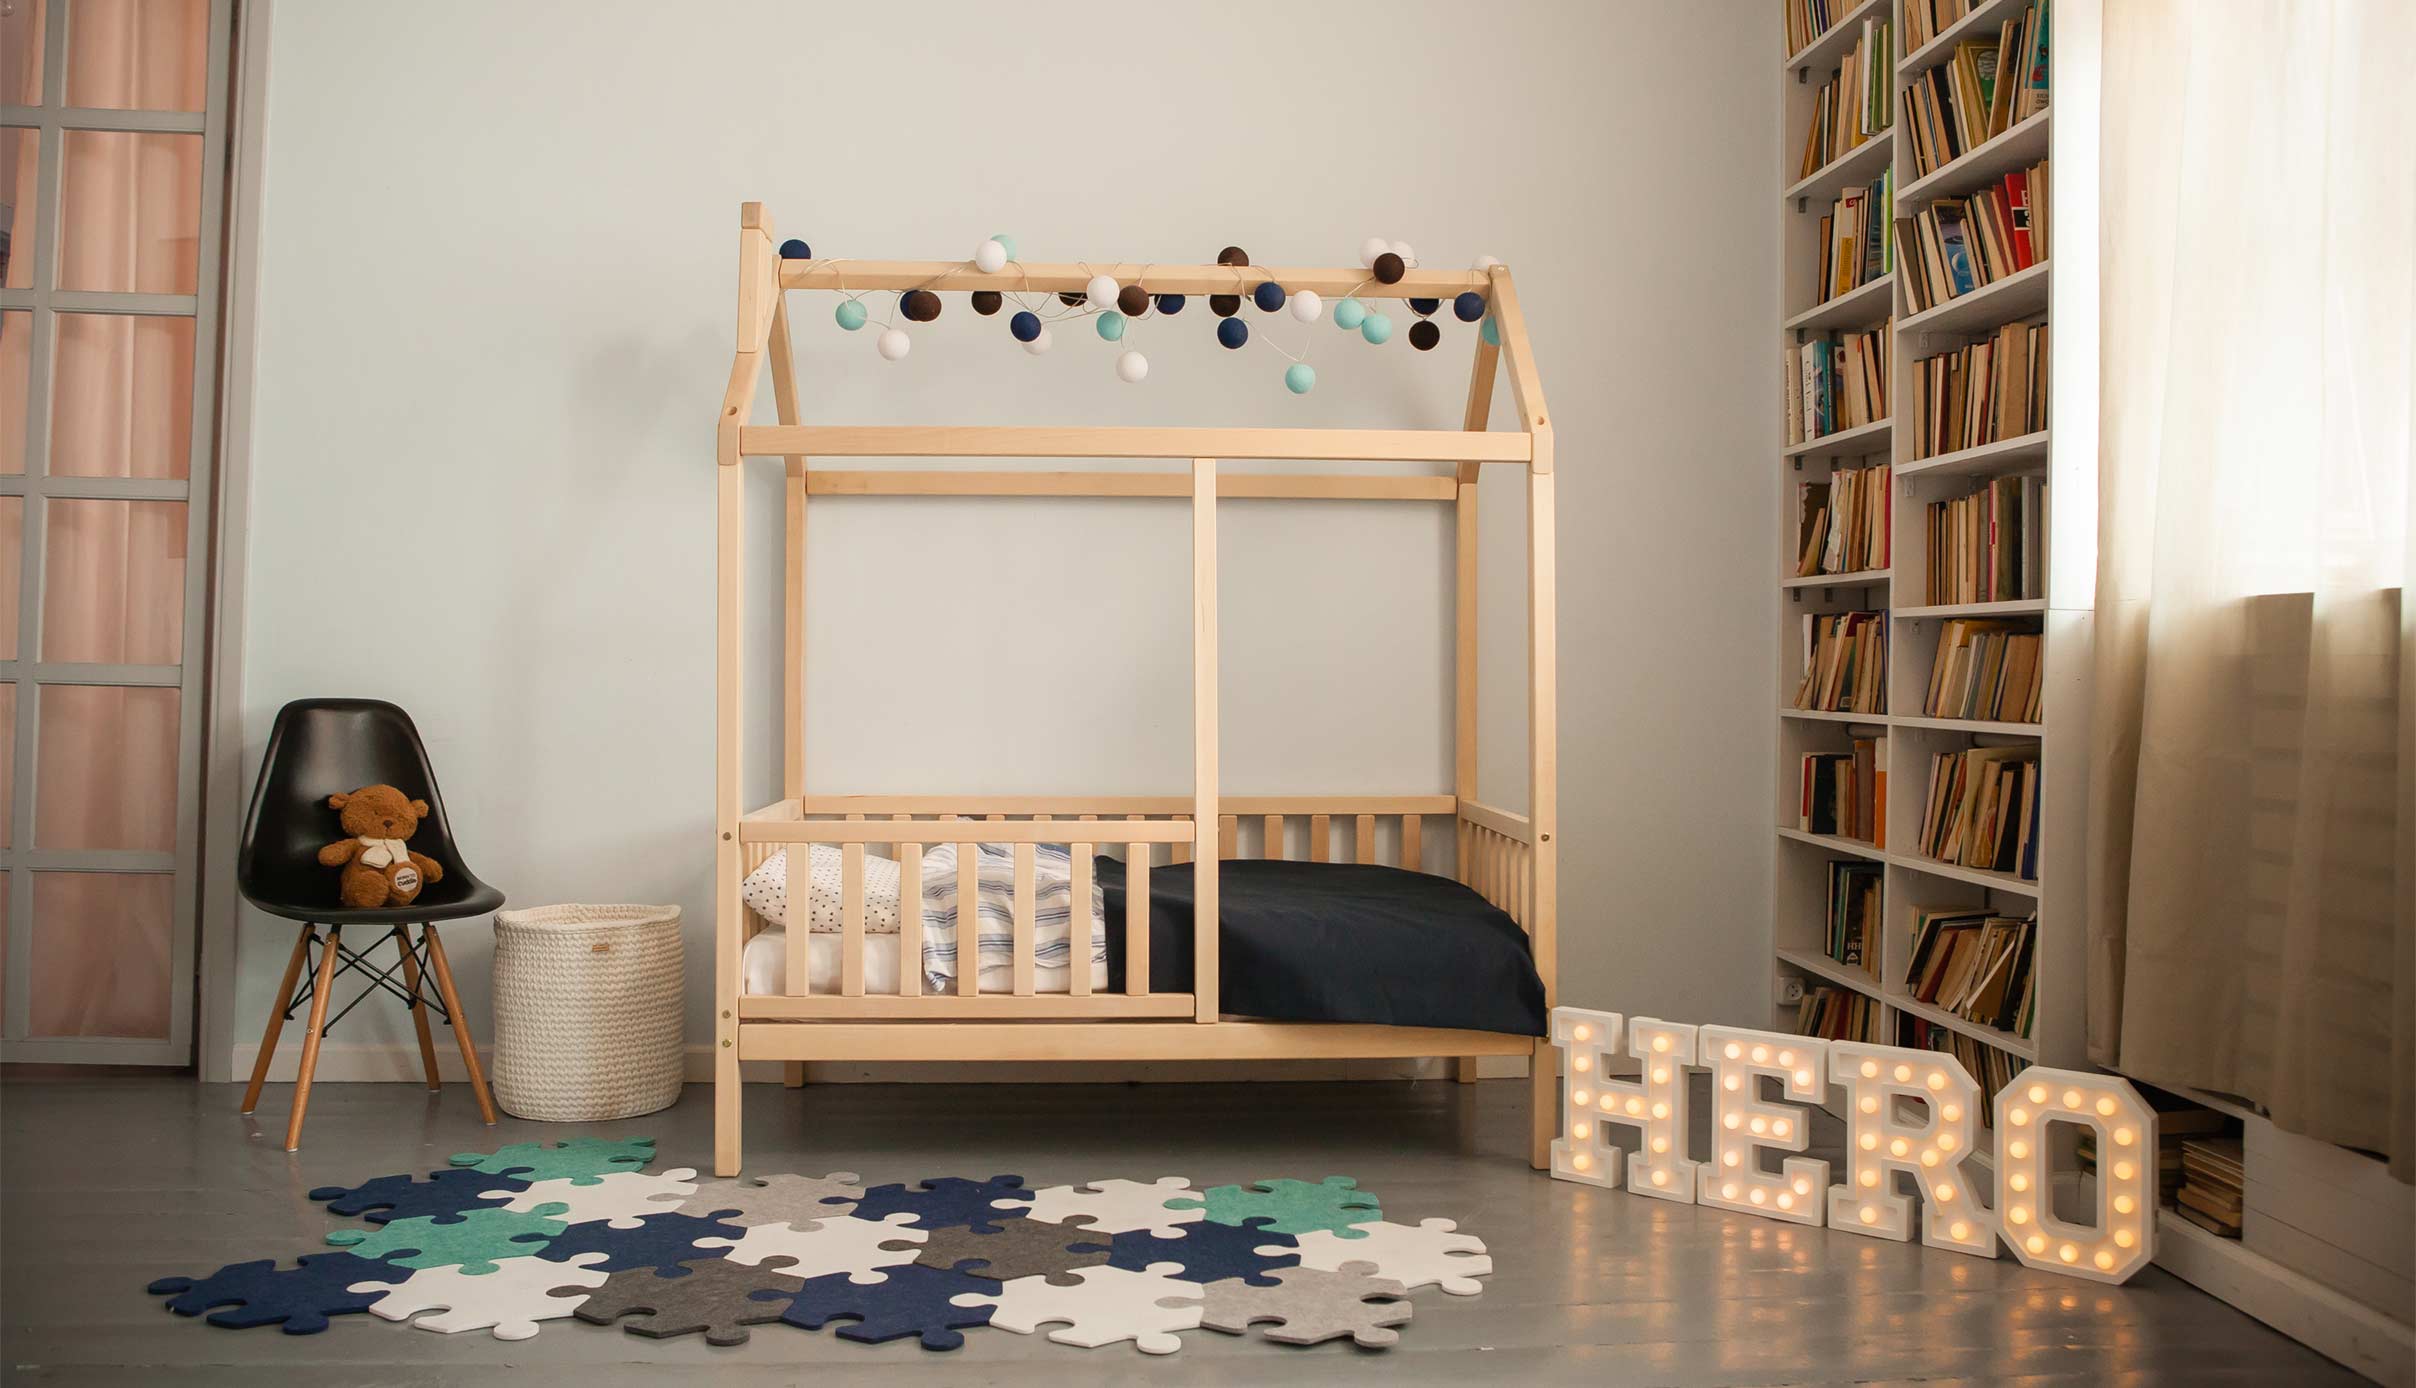 A child's room with a wooden bed and bookshelves.